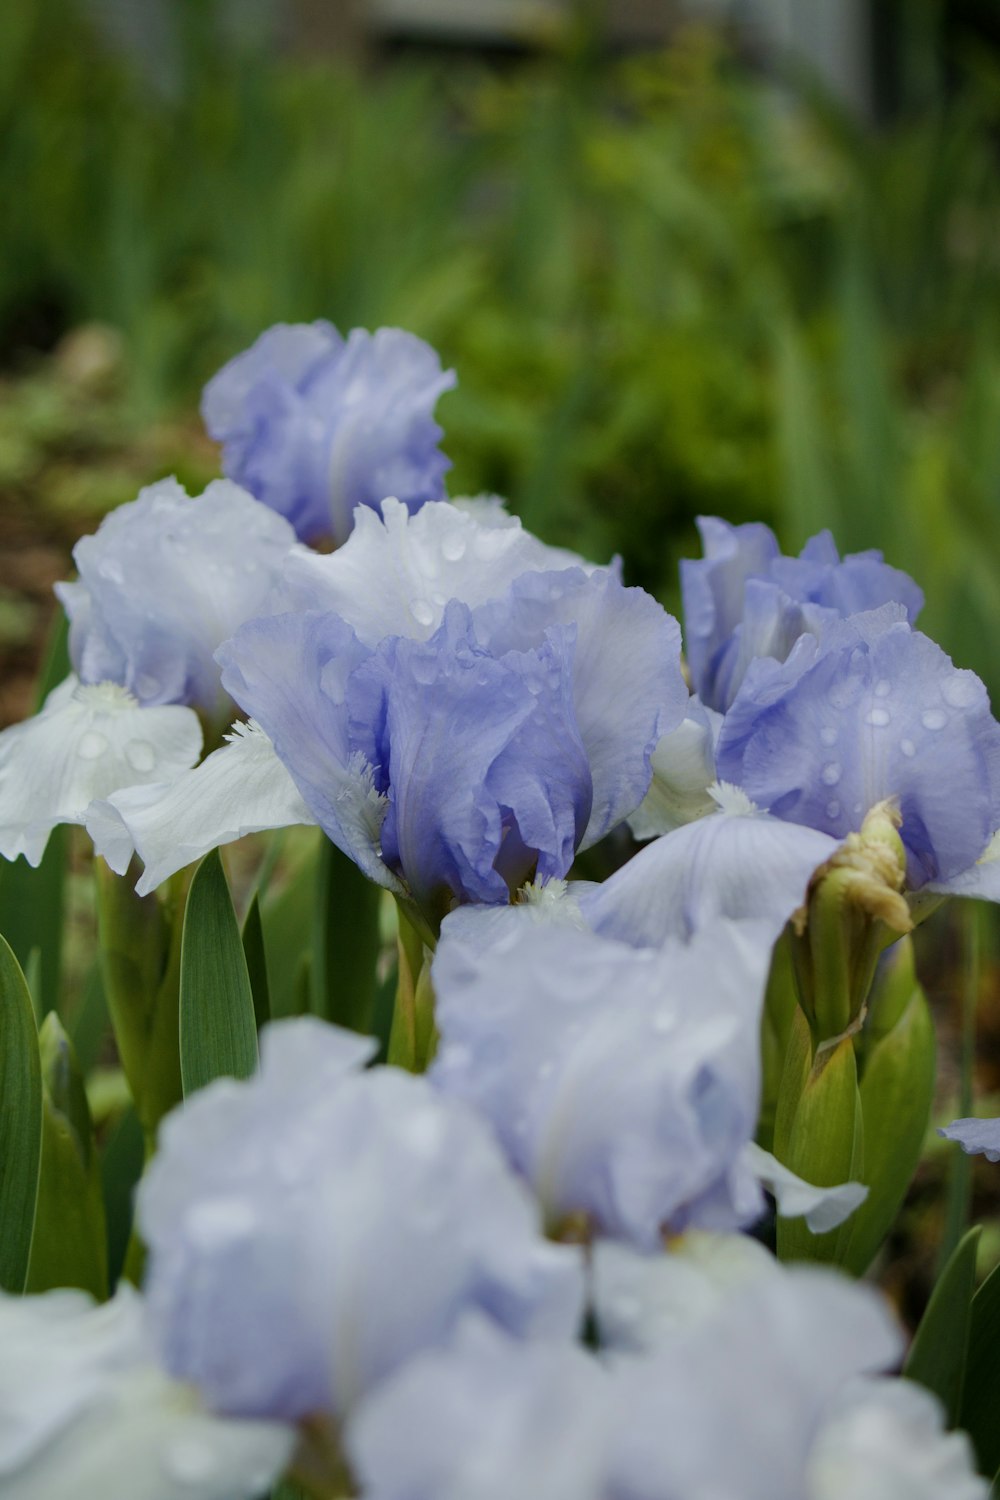 a group of blue and white flowers in a garden